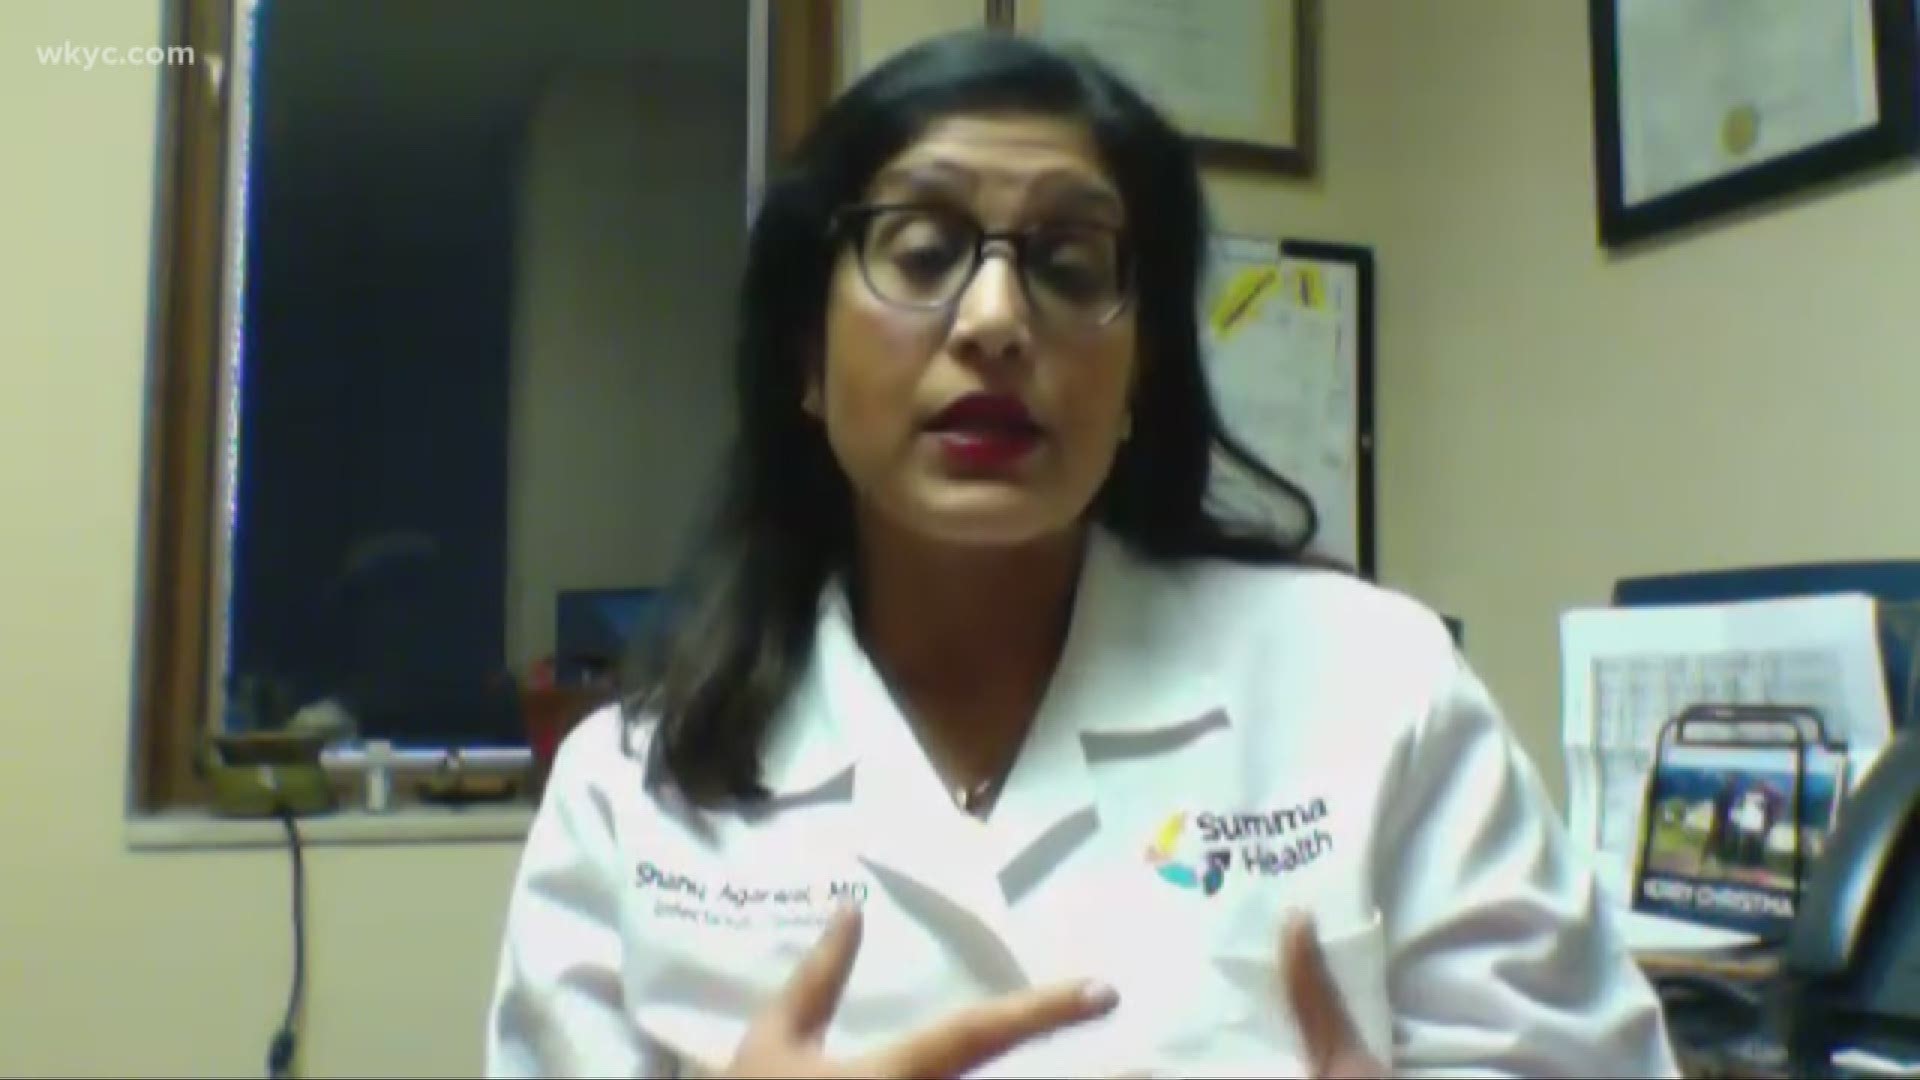 3News' Senior Health Correspondent Monica Robins gets answers to your coronavirus questions with Dr. Shanu Agarwal of Summa Health.